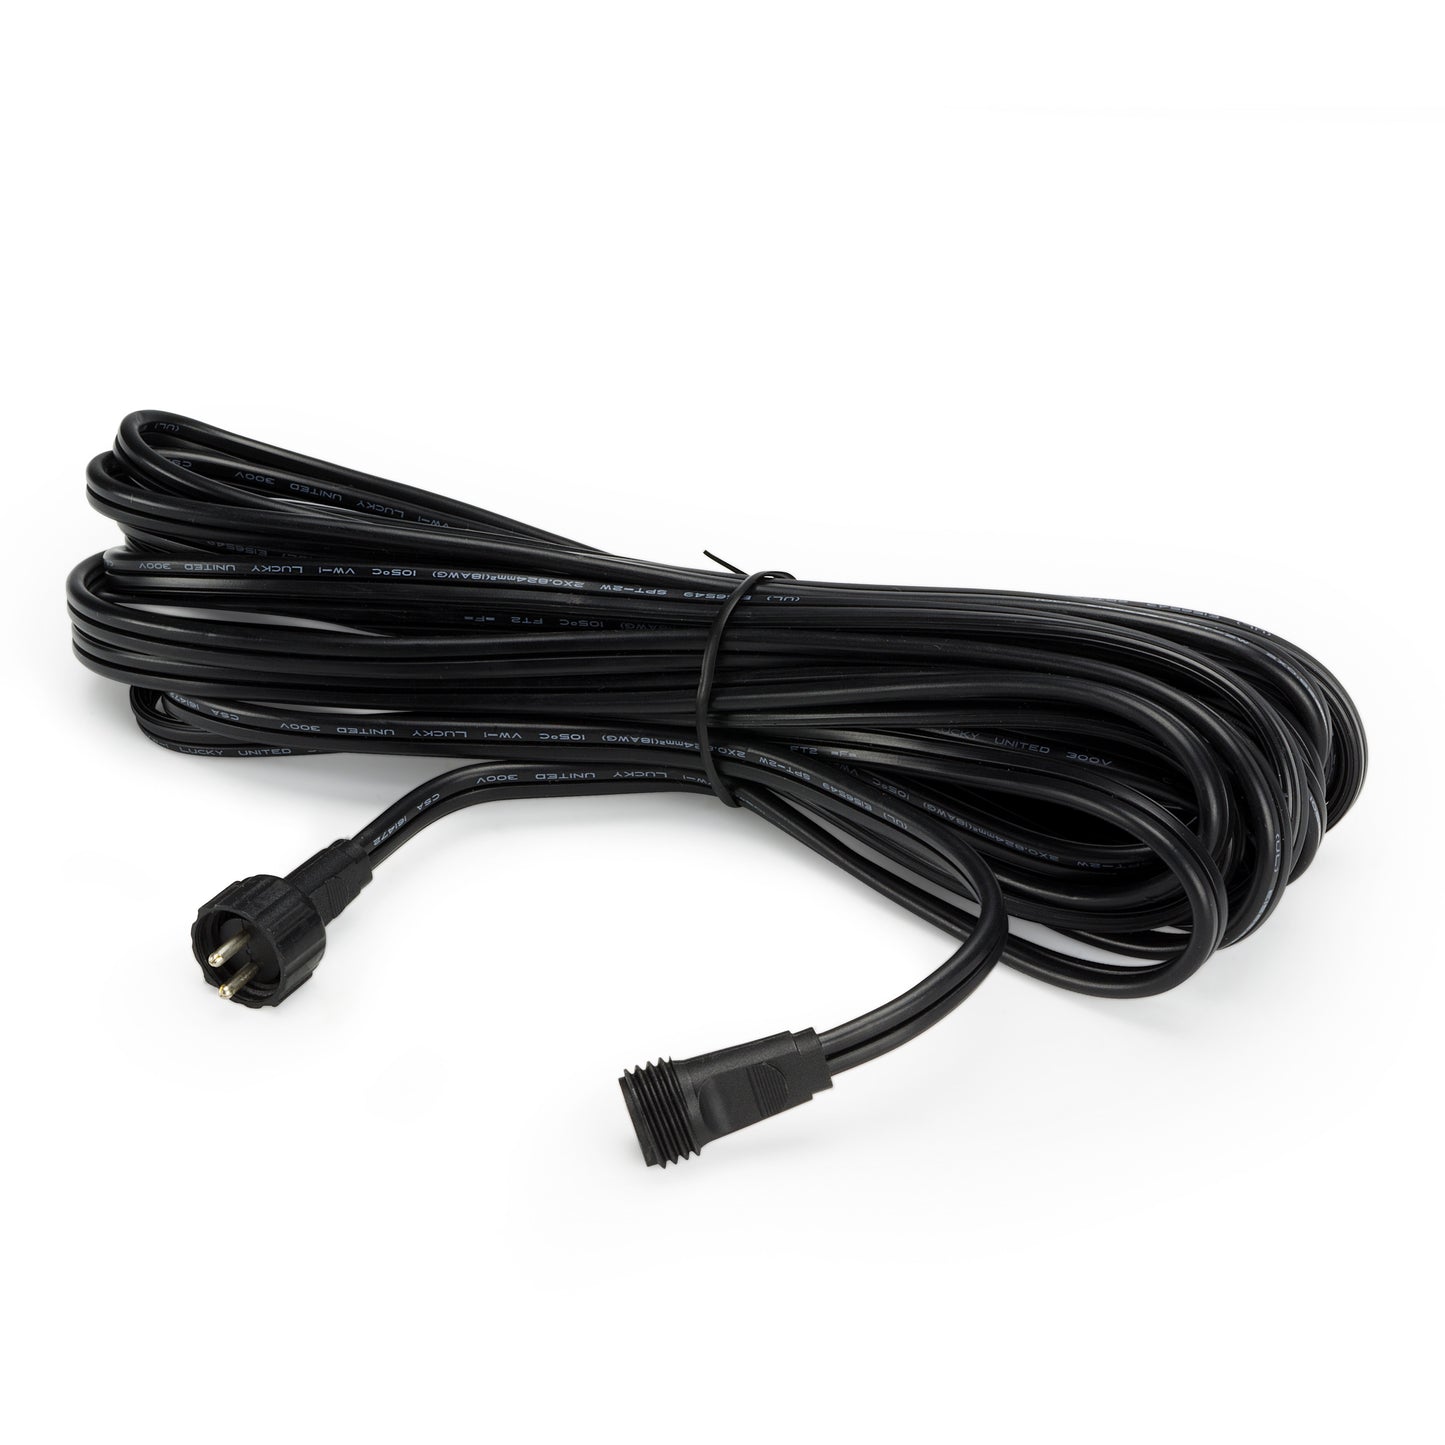 Aquascape Garden and Pond 25' Quick-Connect Lighting Extension Cable - WaterFeature.Shop